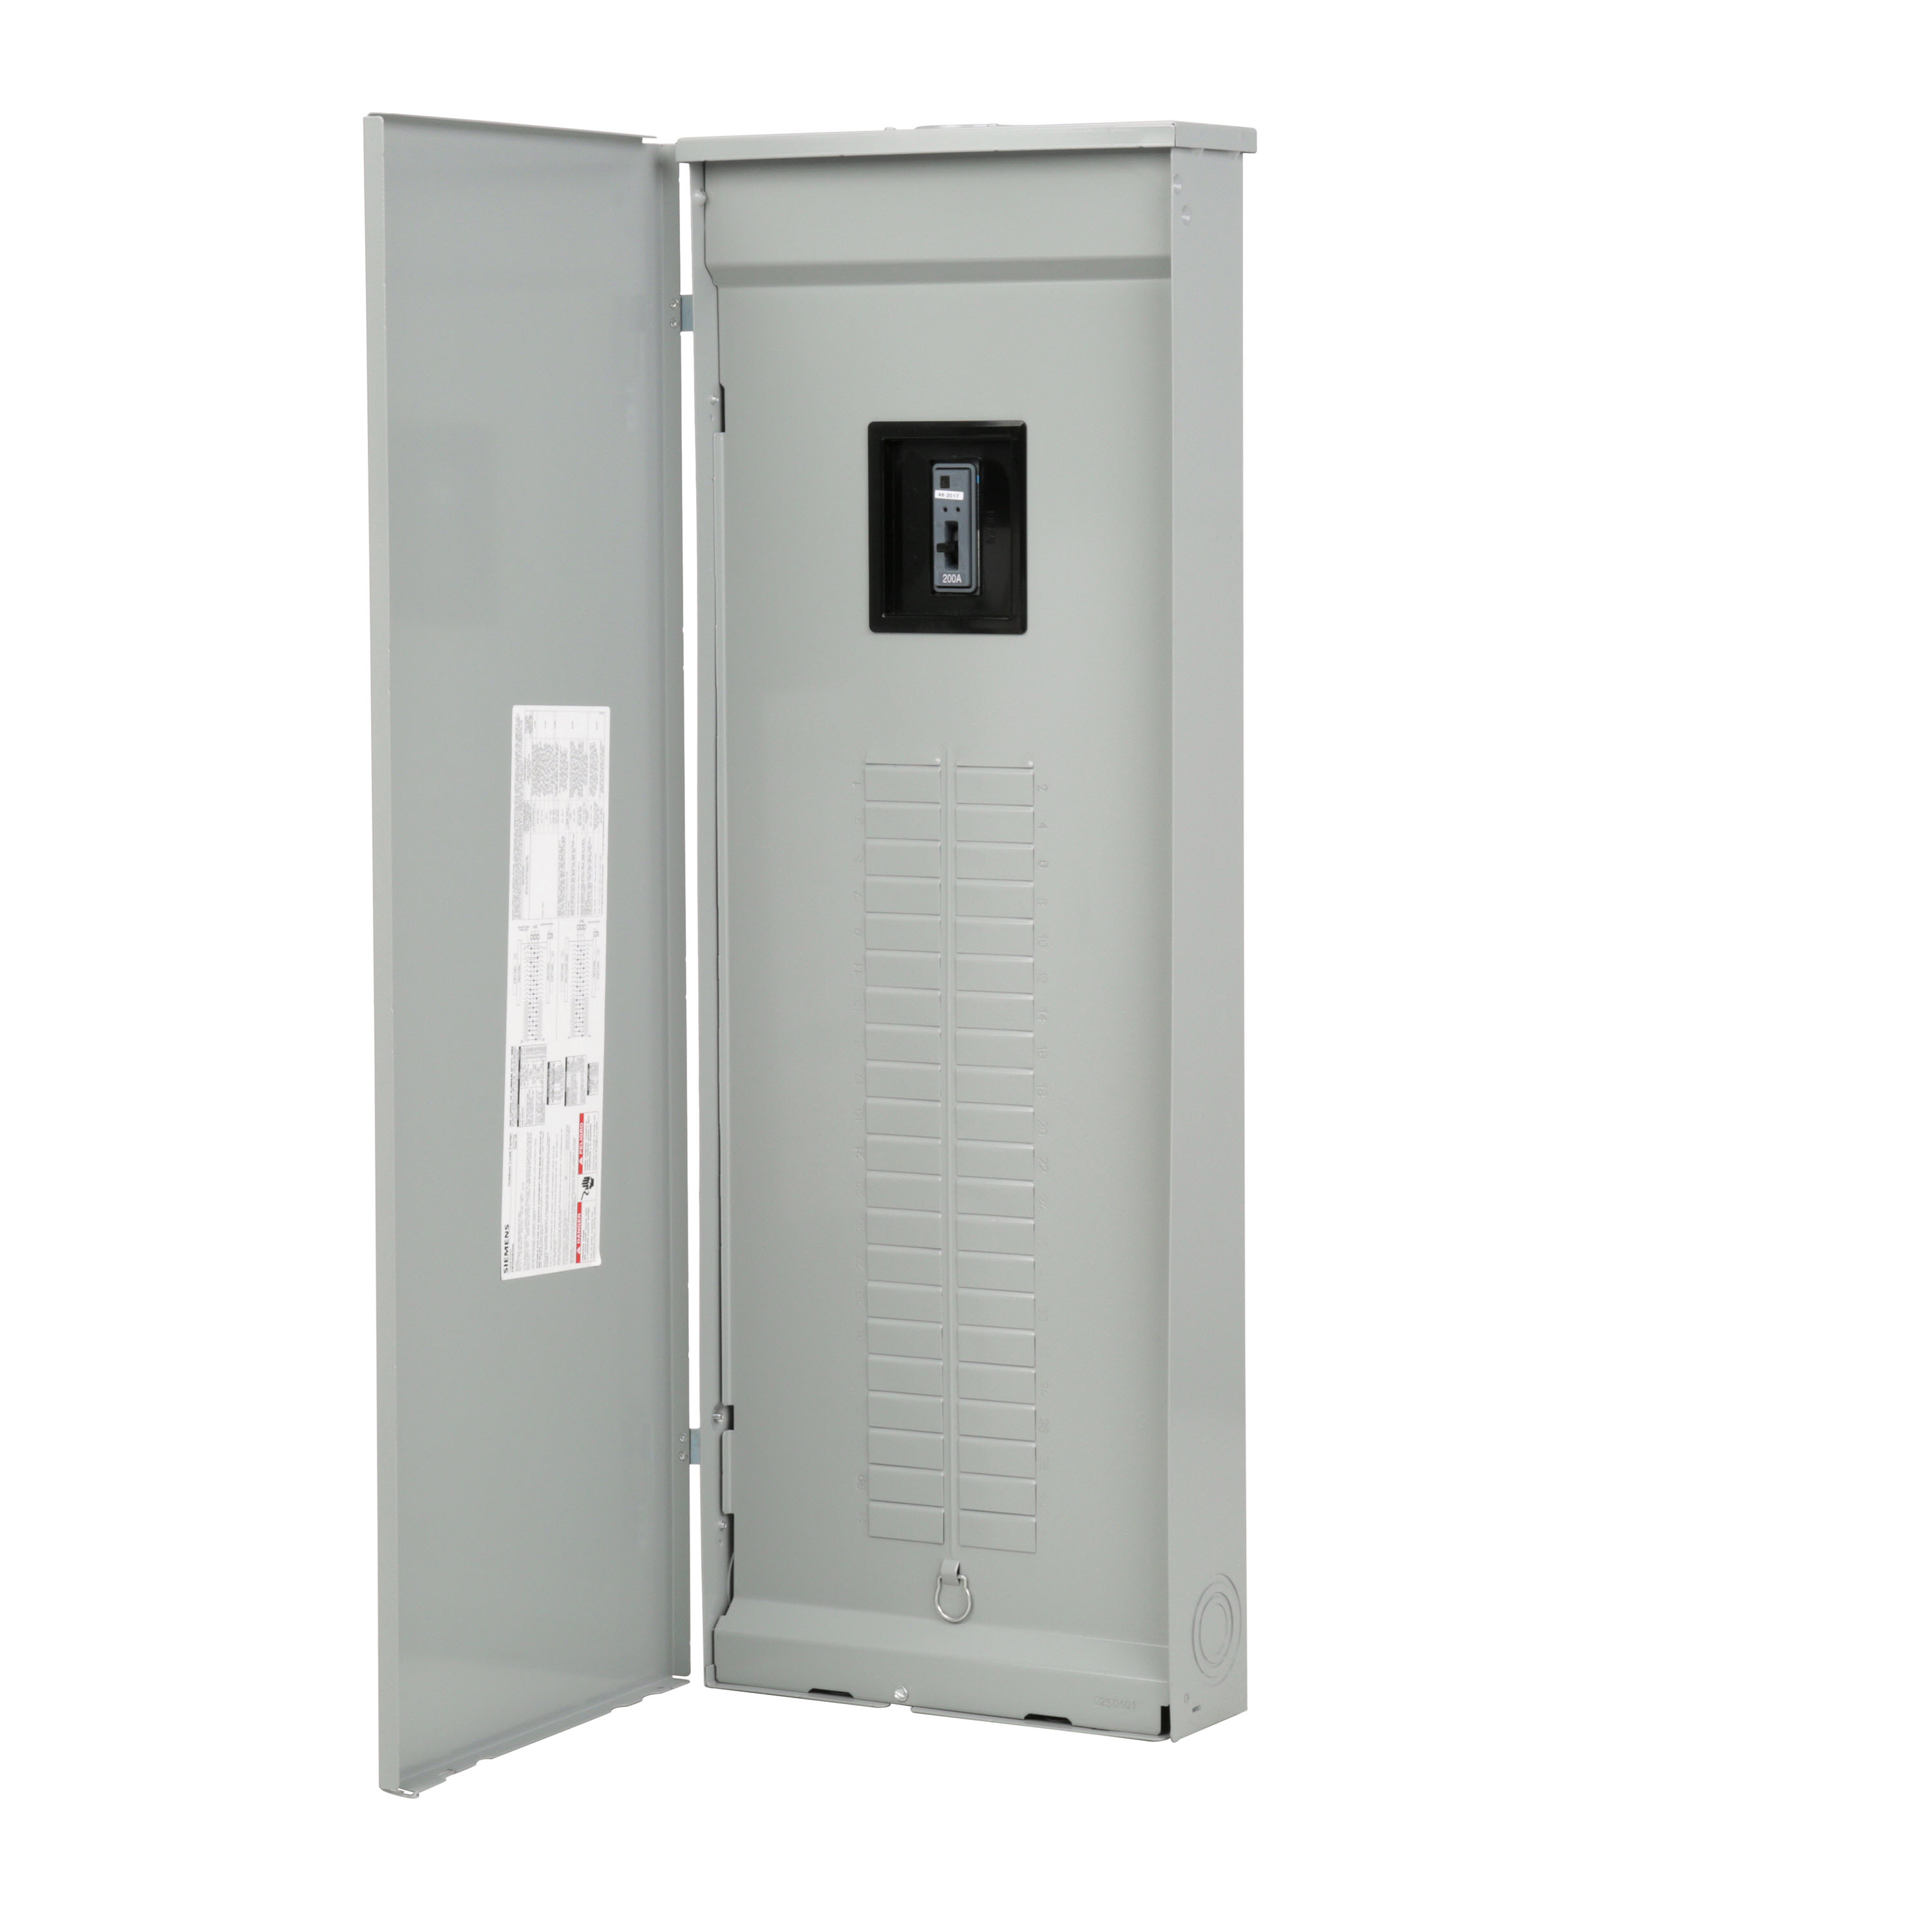 SIEMENS LOW VOLTAGE ES SERIES LOAD CENTER. FACTORY INSTALLED MAIN BREAKER WITH 42 1-INCH SPACES ALLOWING MAX 60 CIRCUITS. 3-PHASE 4-WIRE SYSTEM RATED 120/240V OR 120/208V (200A) 10KA INTERRUPT. SPECIAL FEATURES ALUMINUM BUS, GRAY TRIM, NEMA TYPE3R ENCLOSURE FOR OUTDOOR USE.